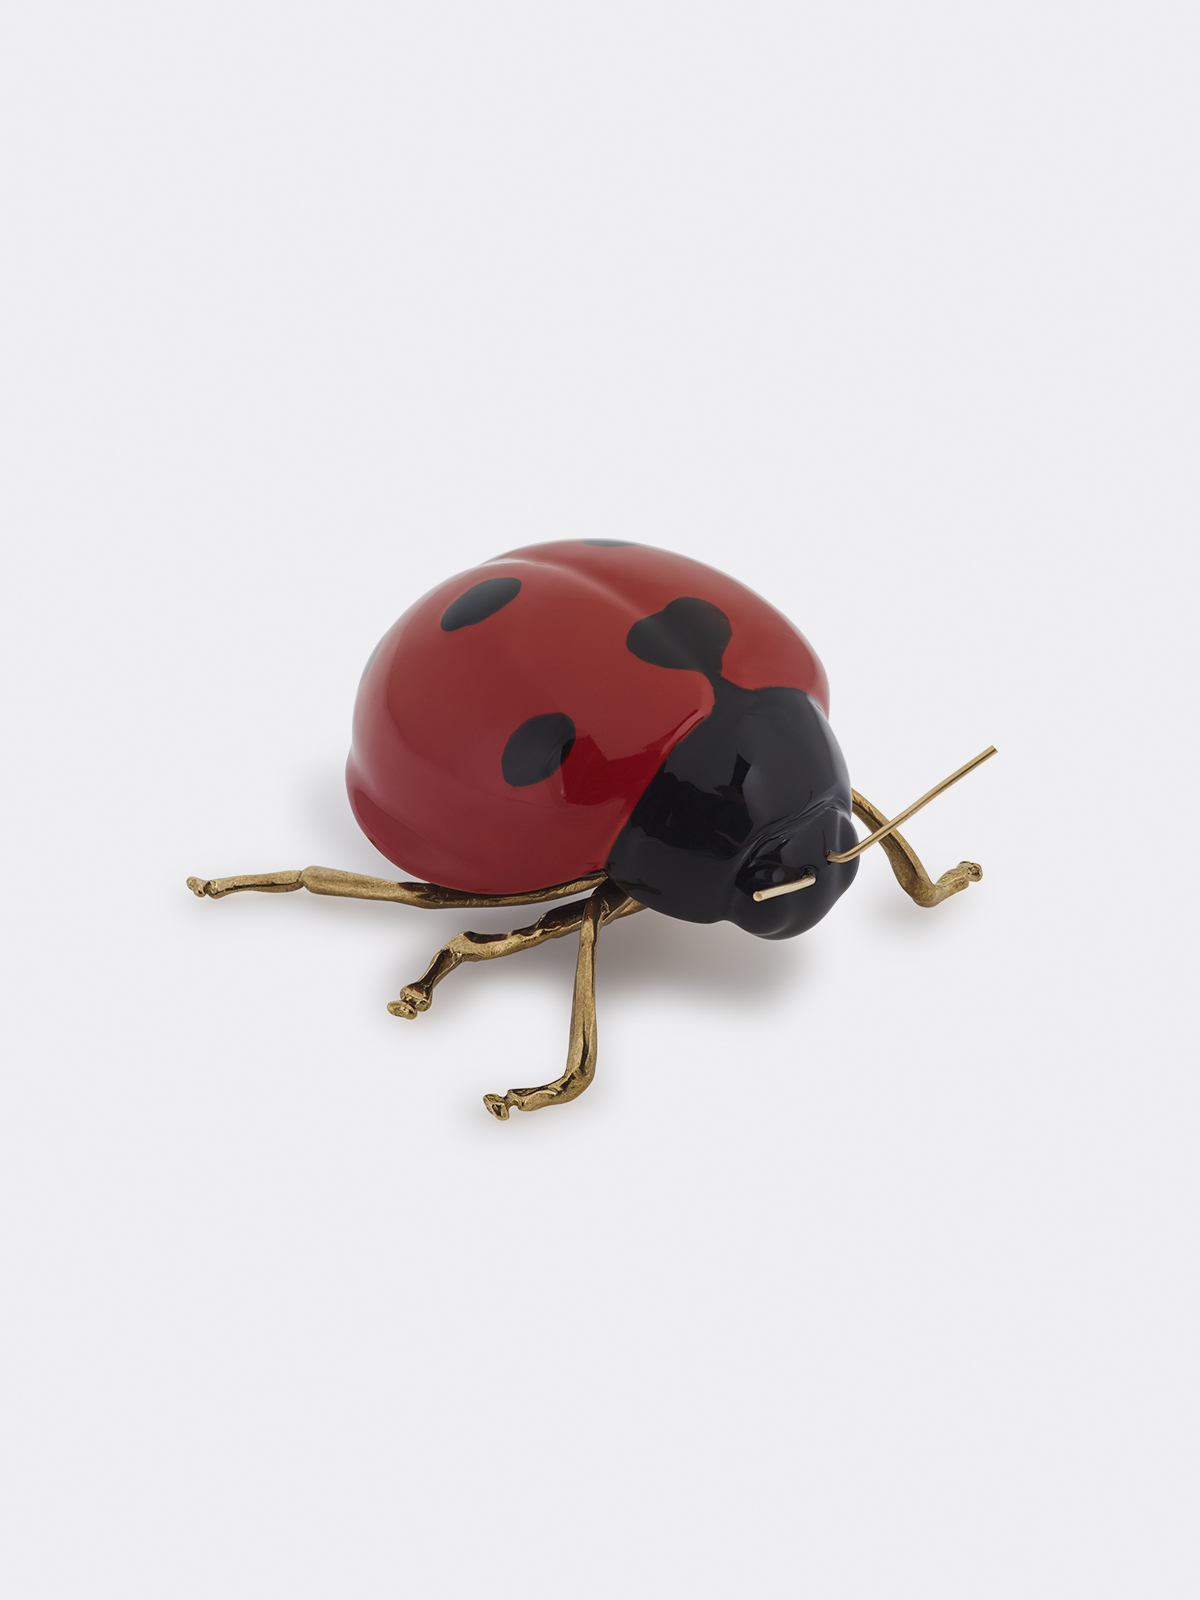 Laboratorio D’Estorias Red Ladybug with brass legs decorated by hand